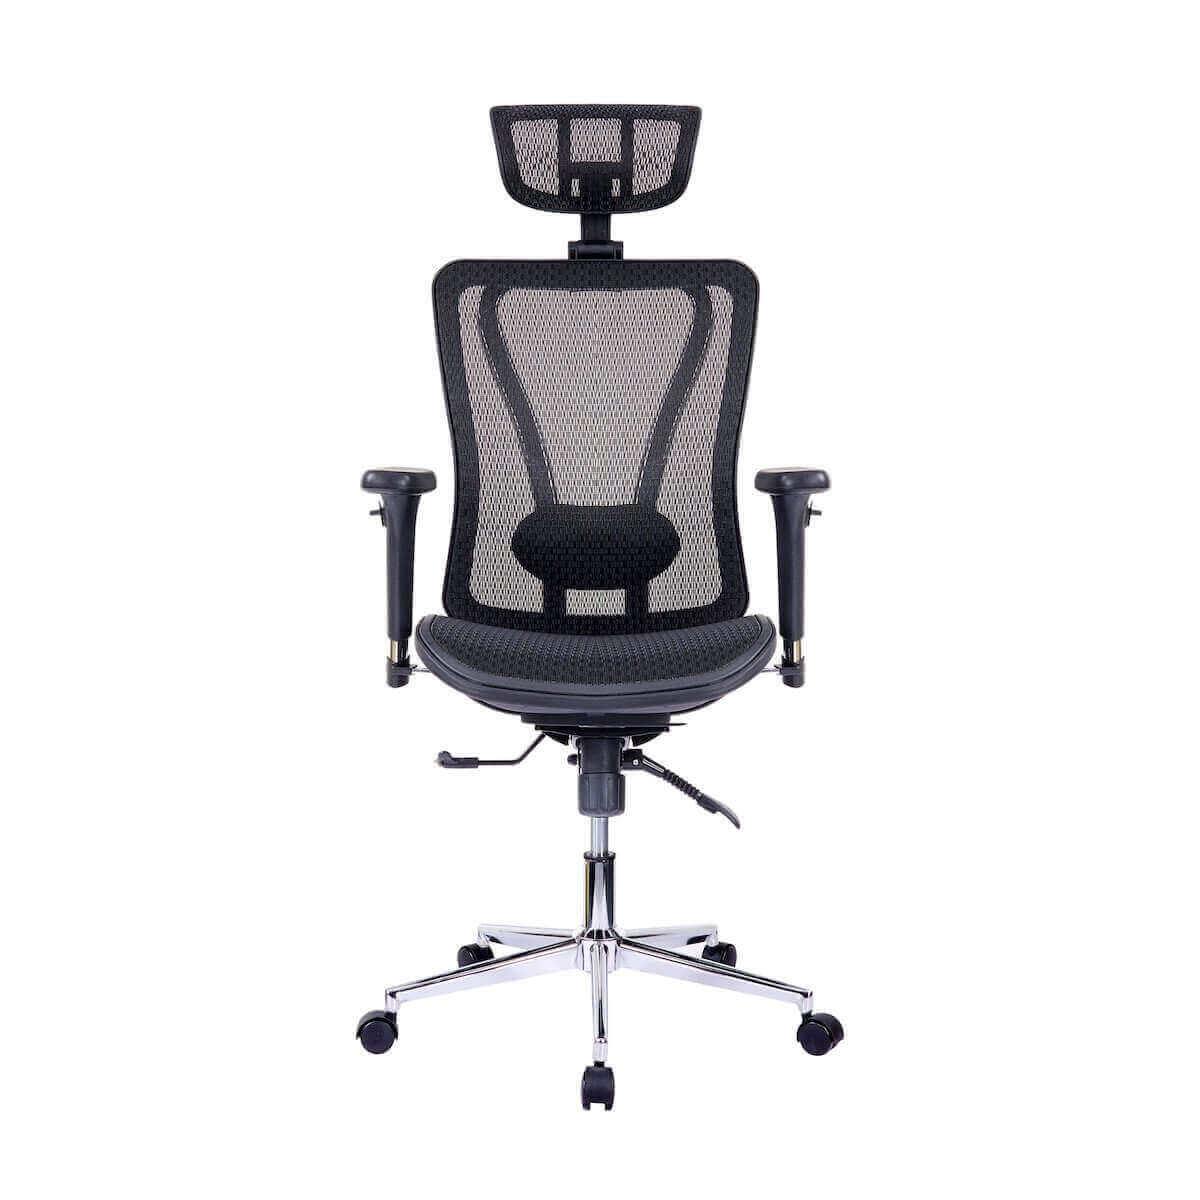 Techni Mobili High Back Executive Mesh Office Chair with Arms, Headrest and  Lumbar Support, Black RTA-1009-BK